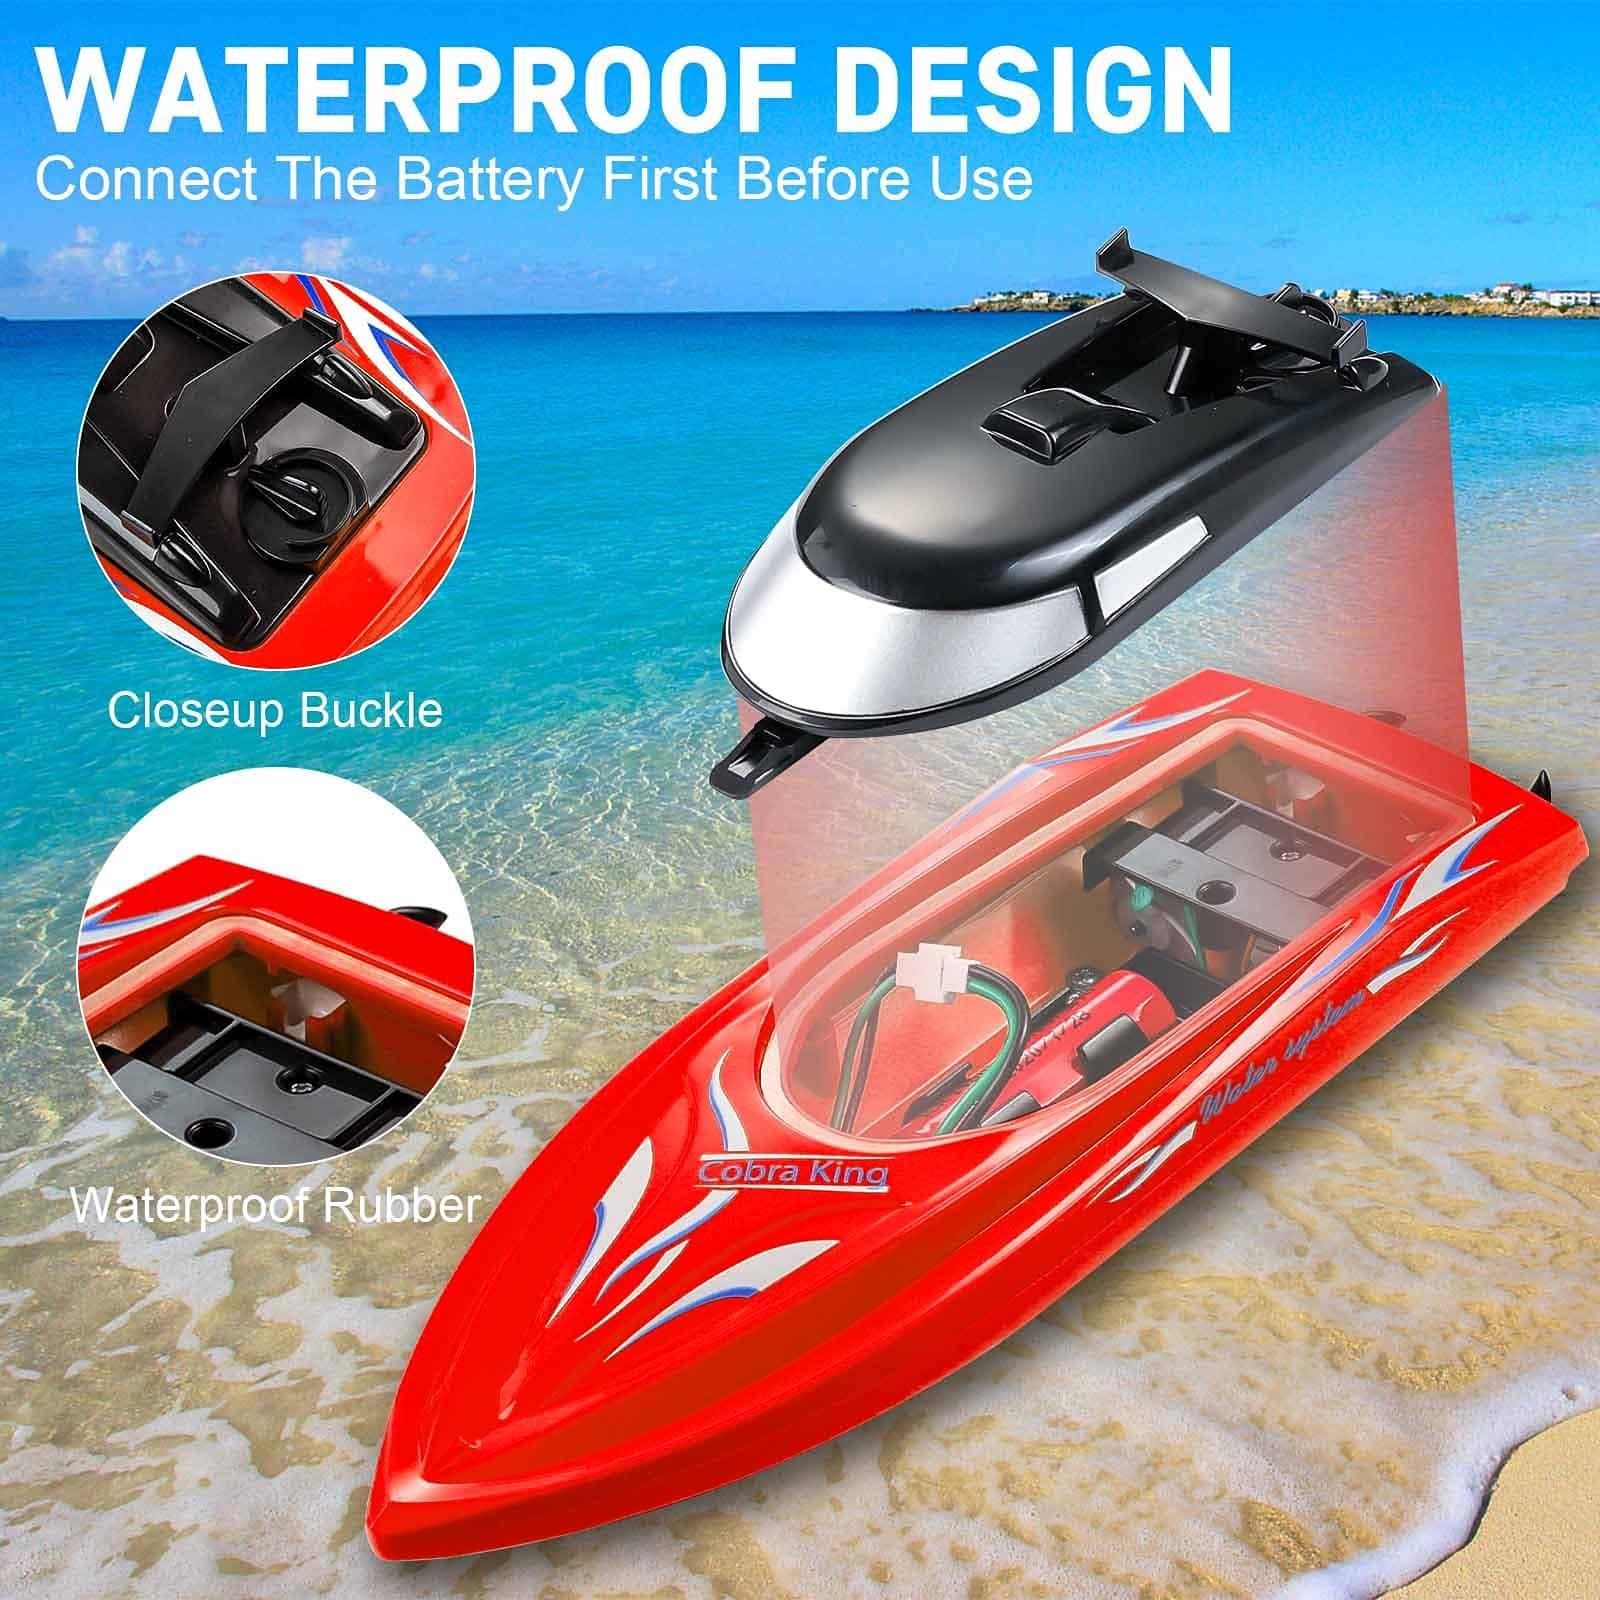 Cobra King Rc Boat: Cobra King RC Boat: The Ultimate Choice for RC Boating Enthusiasts.